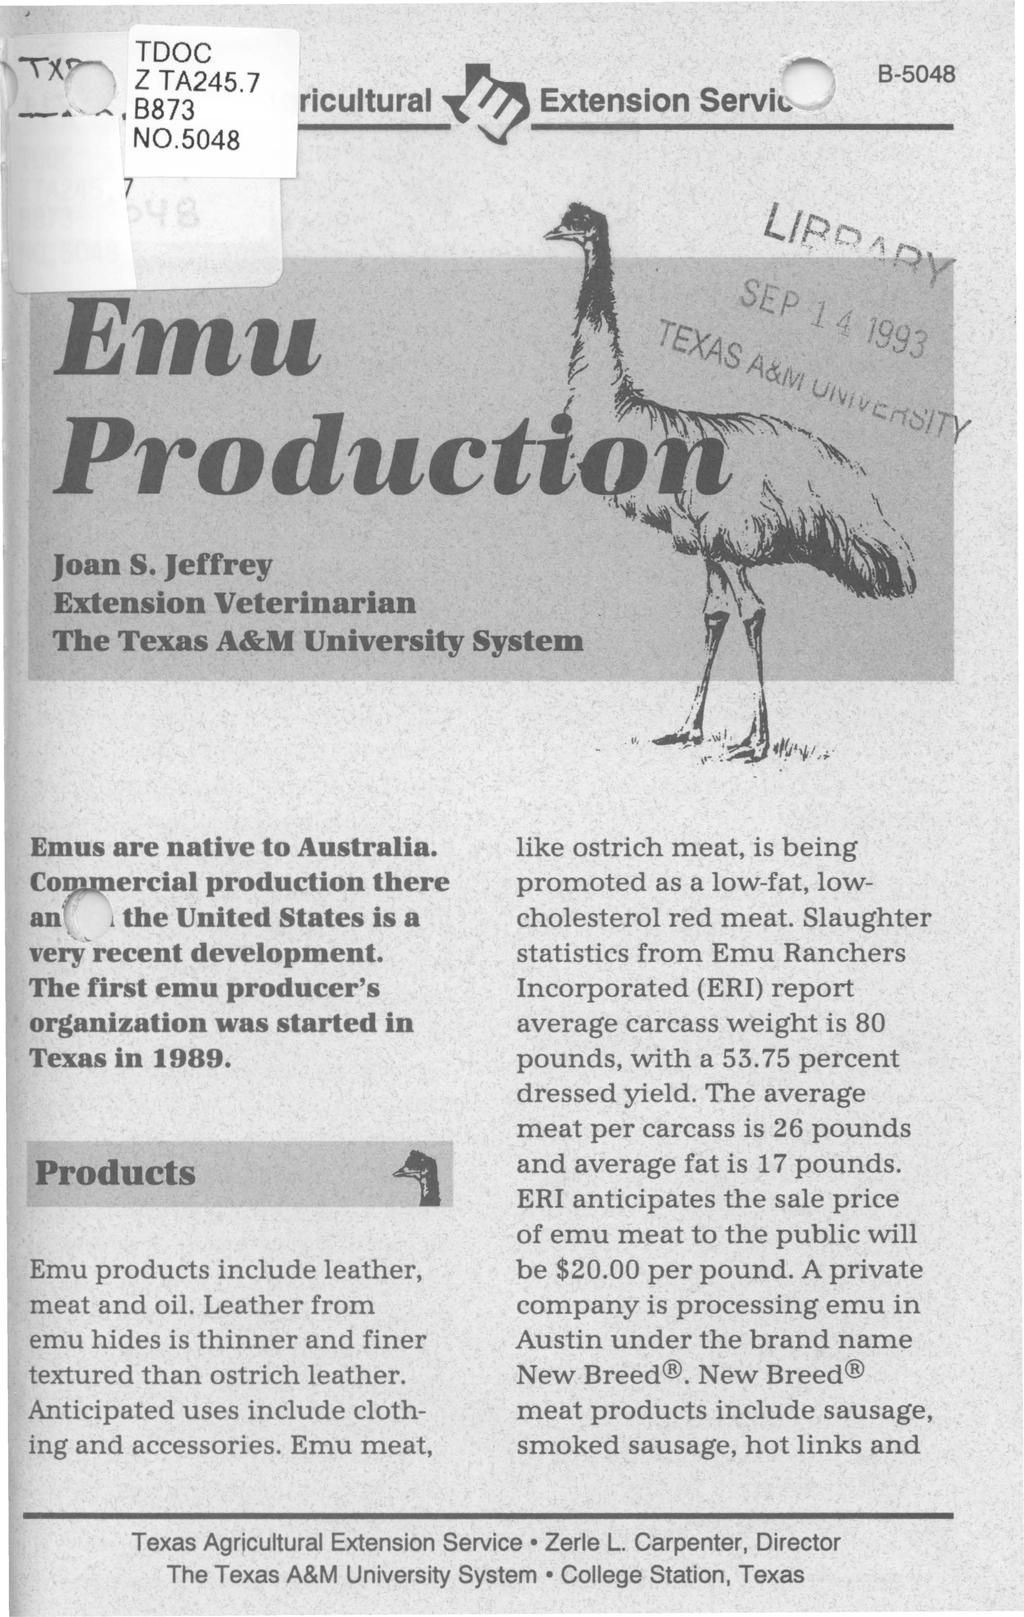 _... TDOC Z TA24S.7... 8873 NO.S048 ricultural ~ Extension Servic 8-5048 7 Emu Produc Joan S. Jeffrey Extension Veterinarian The Texas A&M University System Emus are native to Australia.